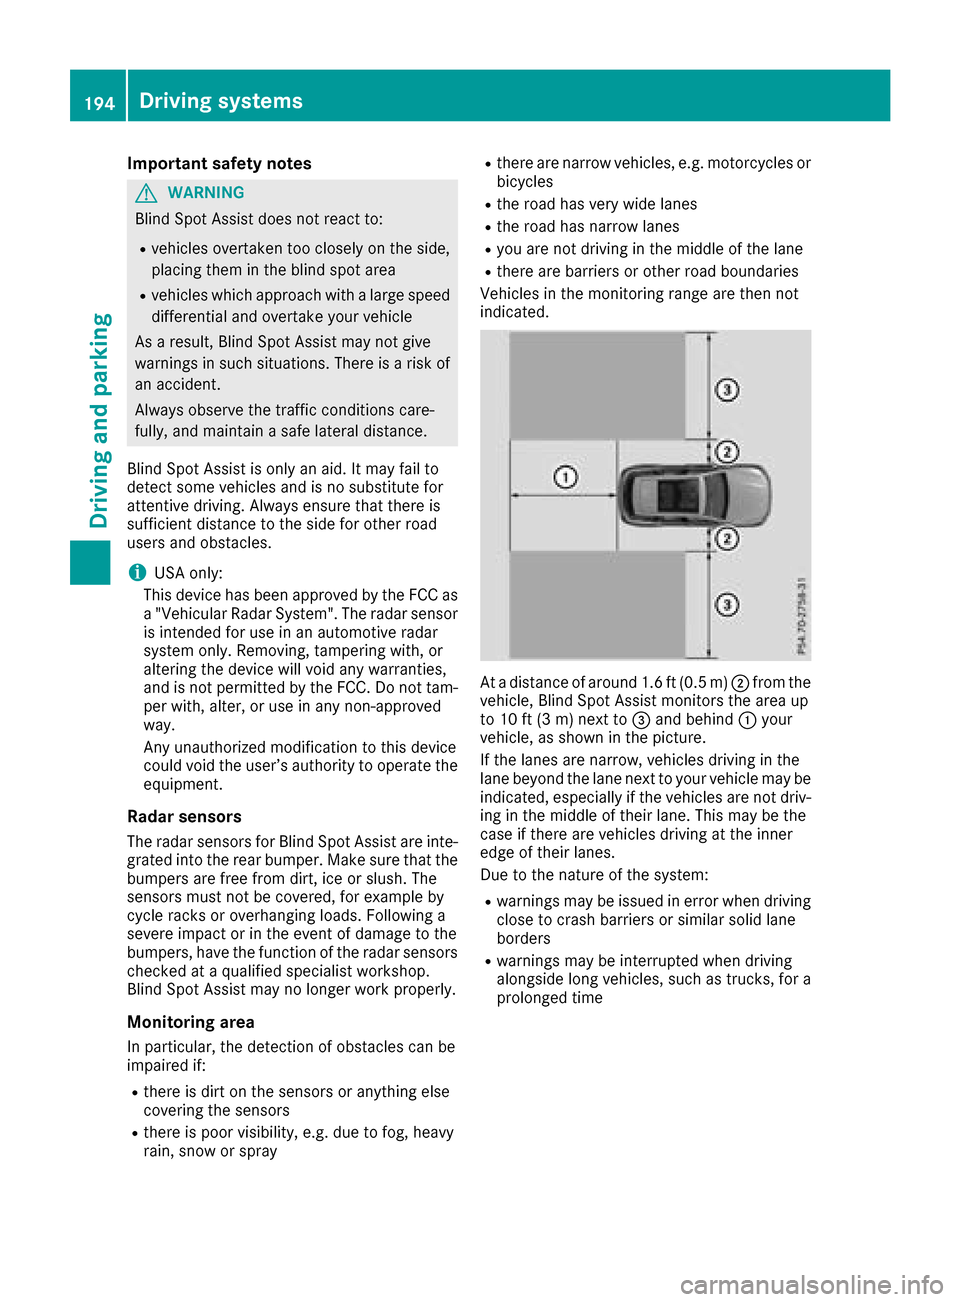 MERCEDES-BENZ GLC SUV 2017 X253 Owners Manual Important safety notes
GWARNING
Blin dSpo t Assist does not react to:
Rvehicles overtaken too closely on the side,
plac ing them inthe blind spot area
Rvehicleswhic happr oach with a large speed
diff 